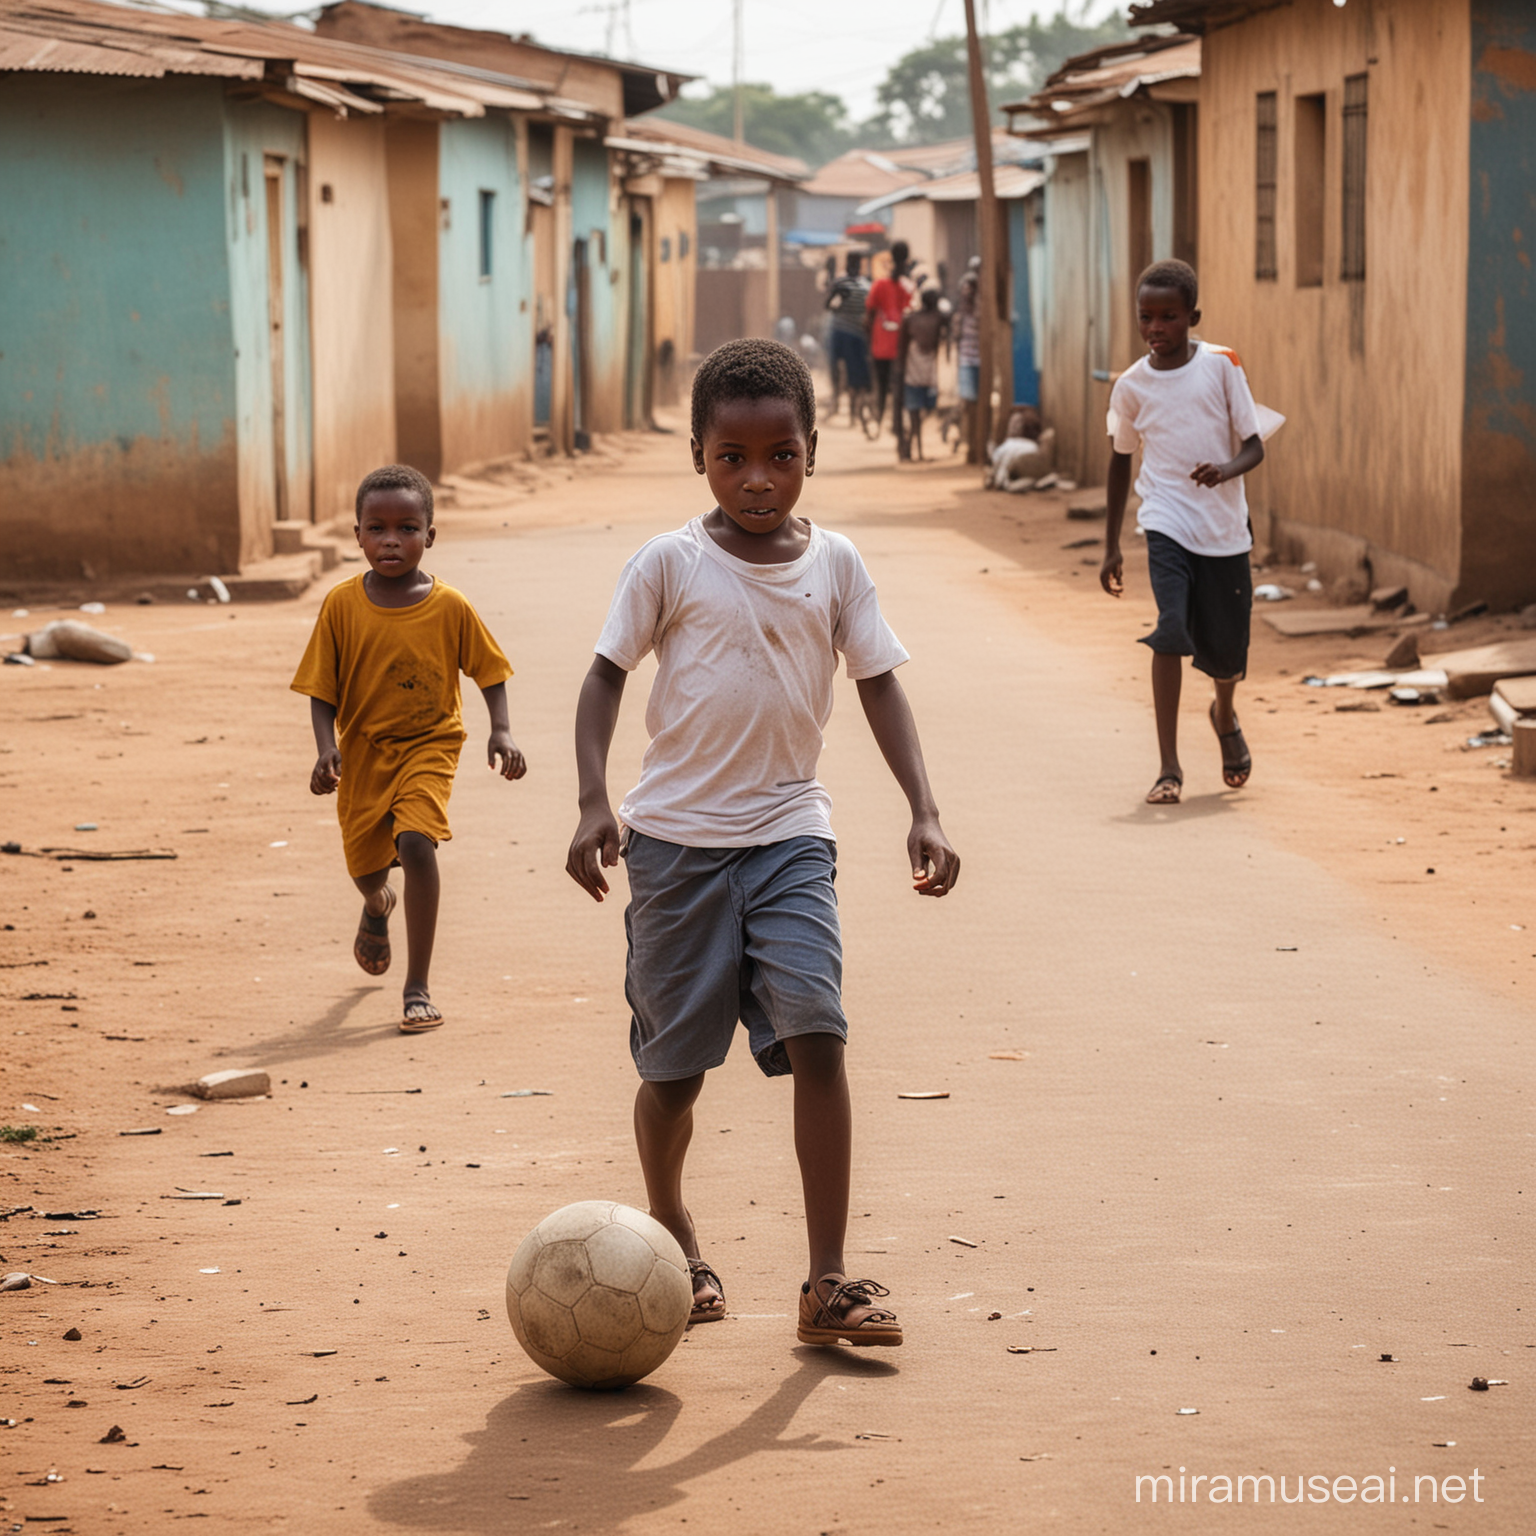 African Children Playing Football in Urban Street Setting